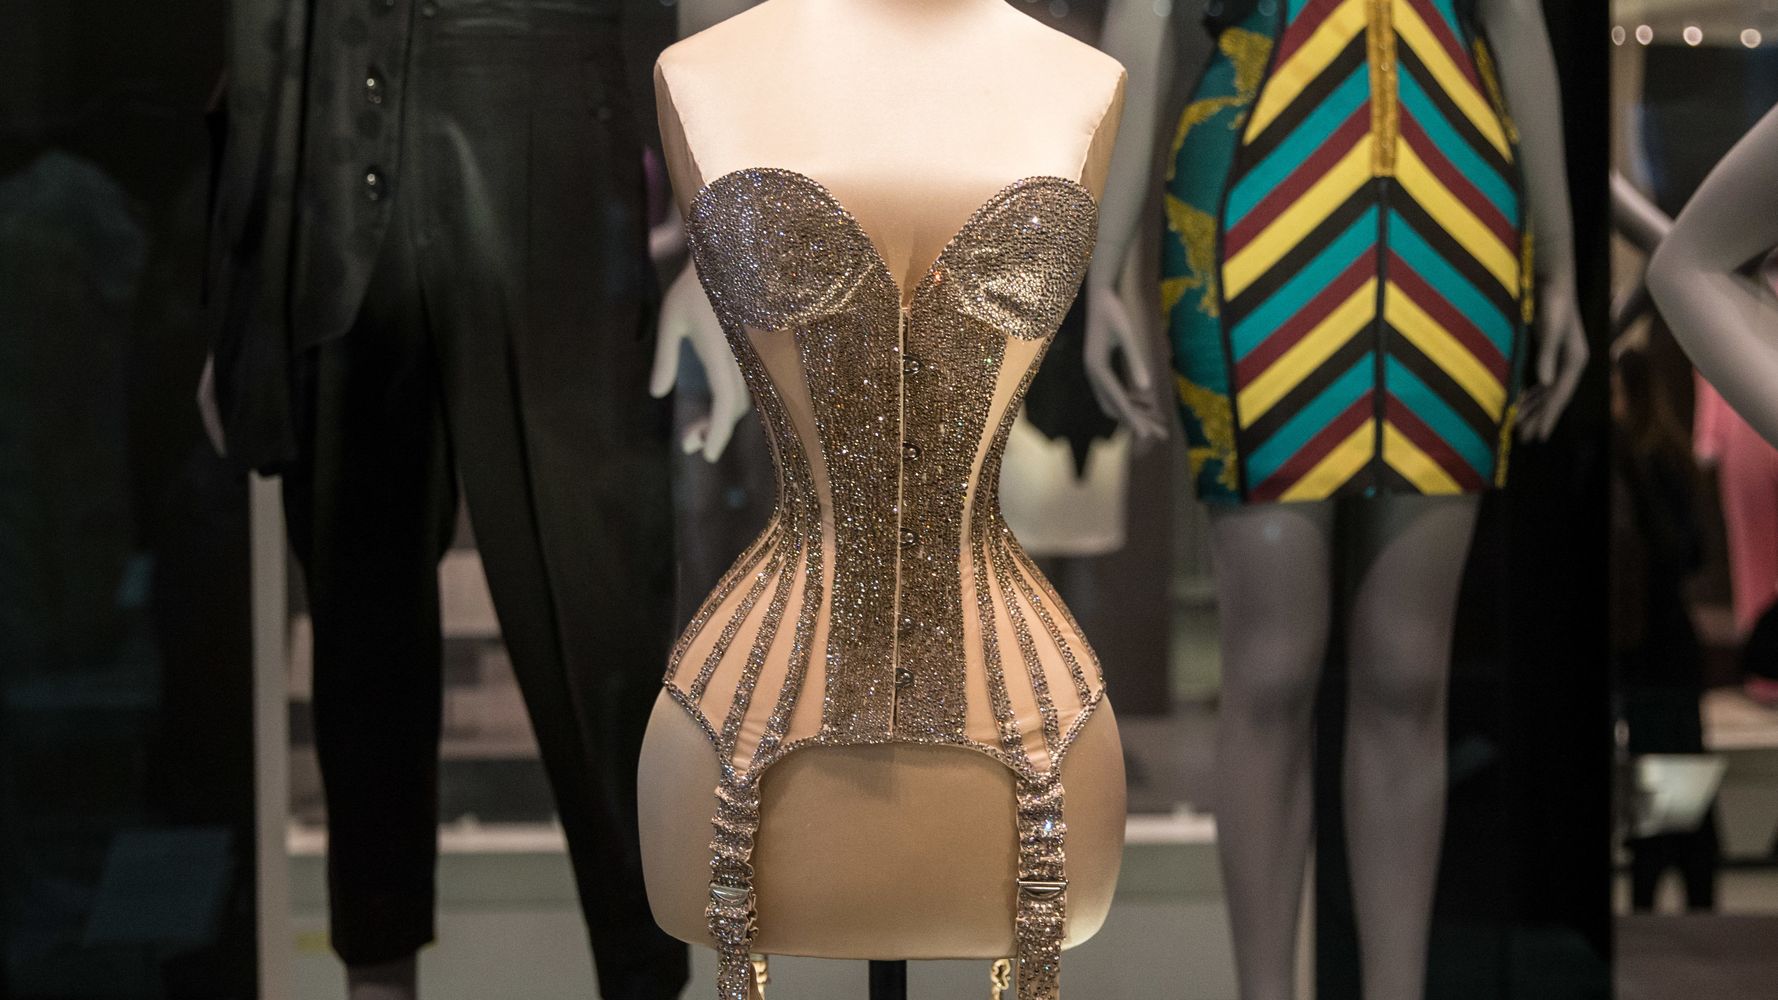 Juicy Couture tracksuit: Victoria and Albert Museum features outfit